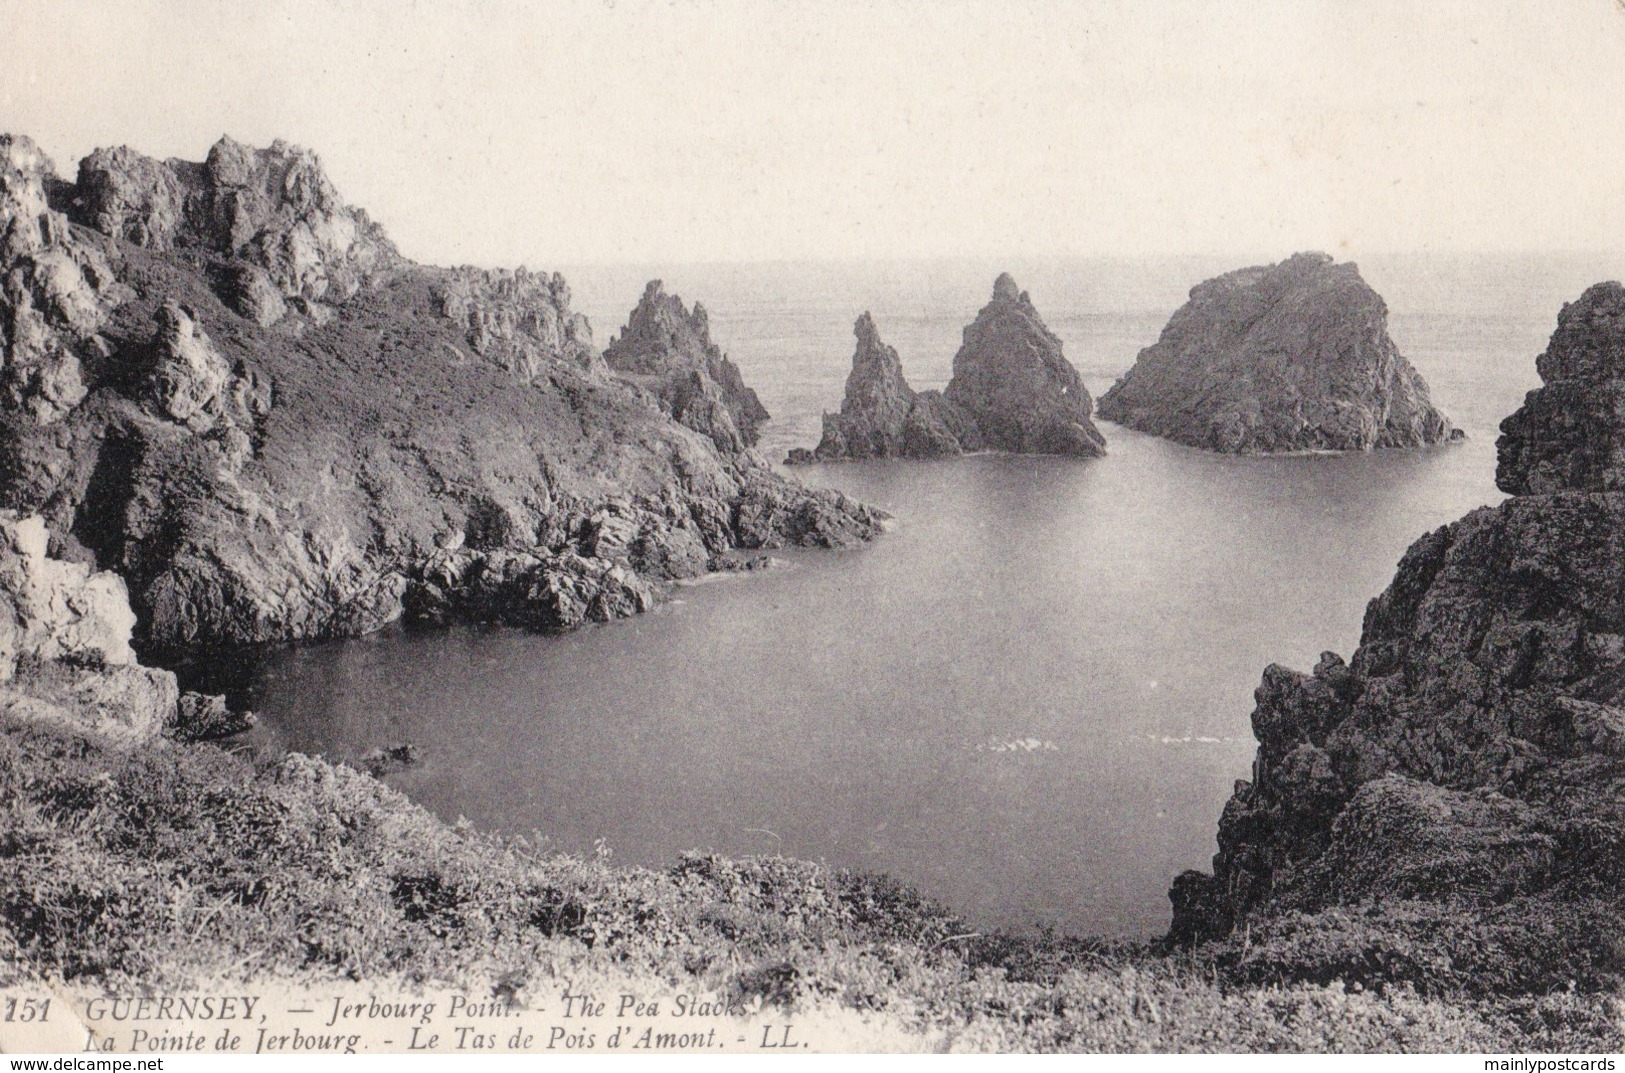 AK66 Guernsey, Jerbourg Point, The Pea Stacks - LL - Guernsey